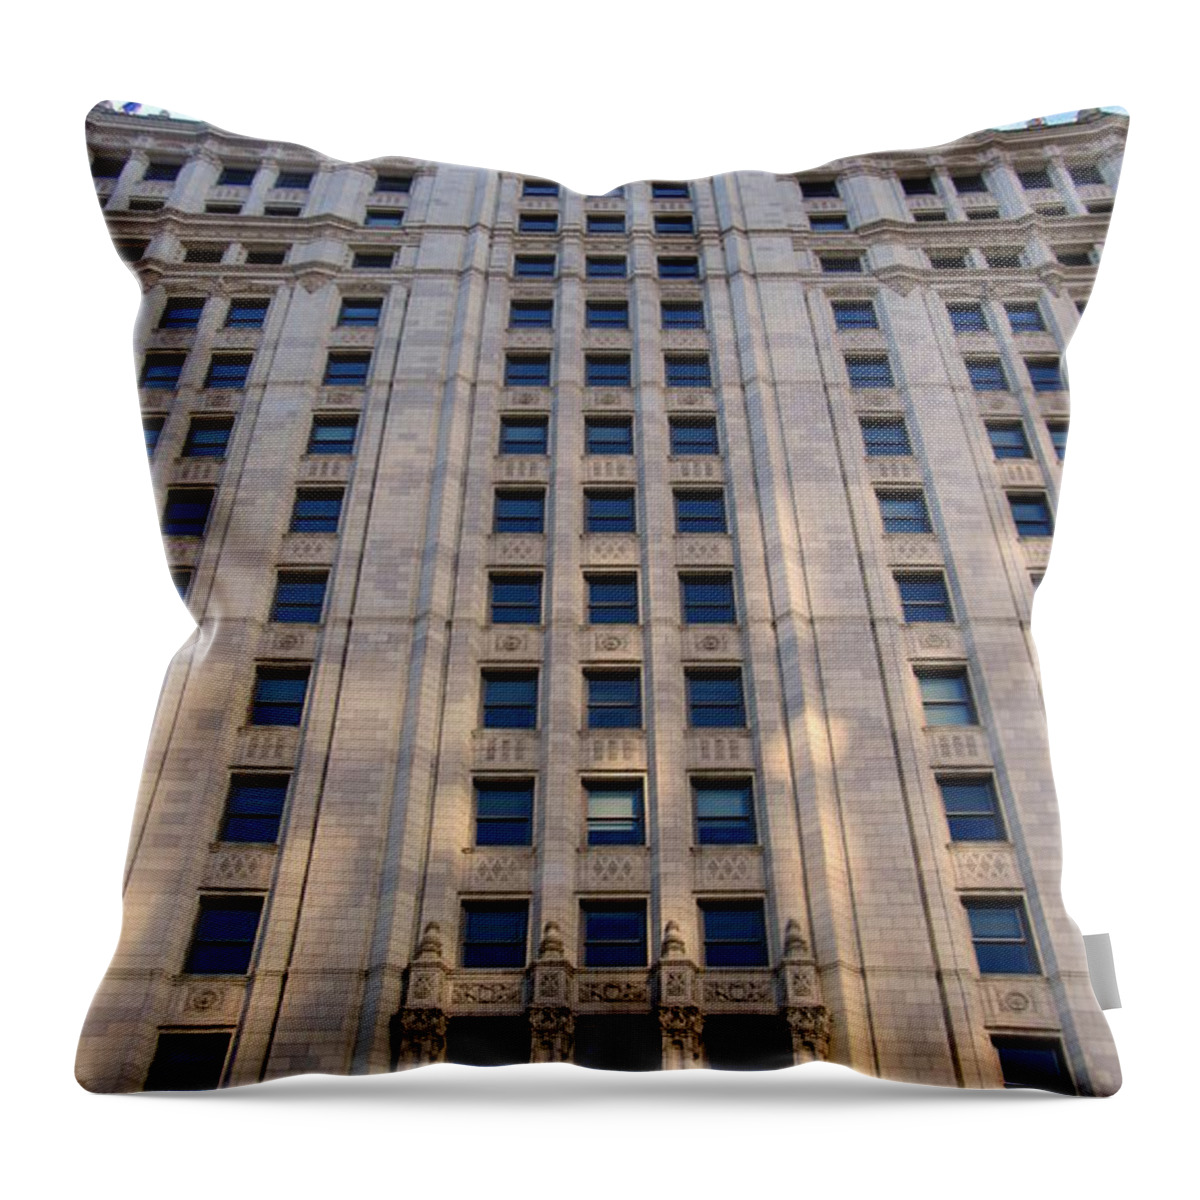 Chicago Throw Pillow featuring the photograph Chicago Wrigley Building 4 by Anita Burgermeister